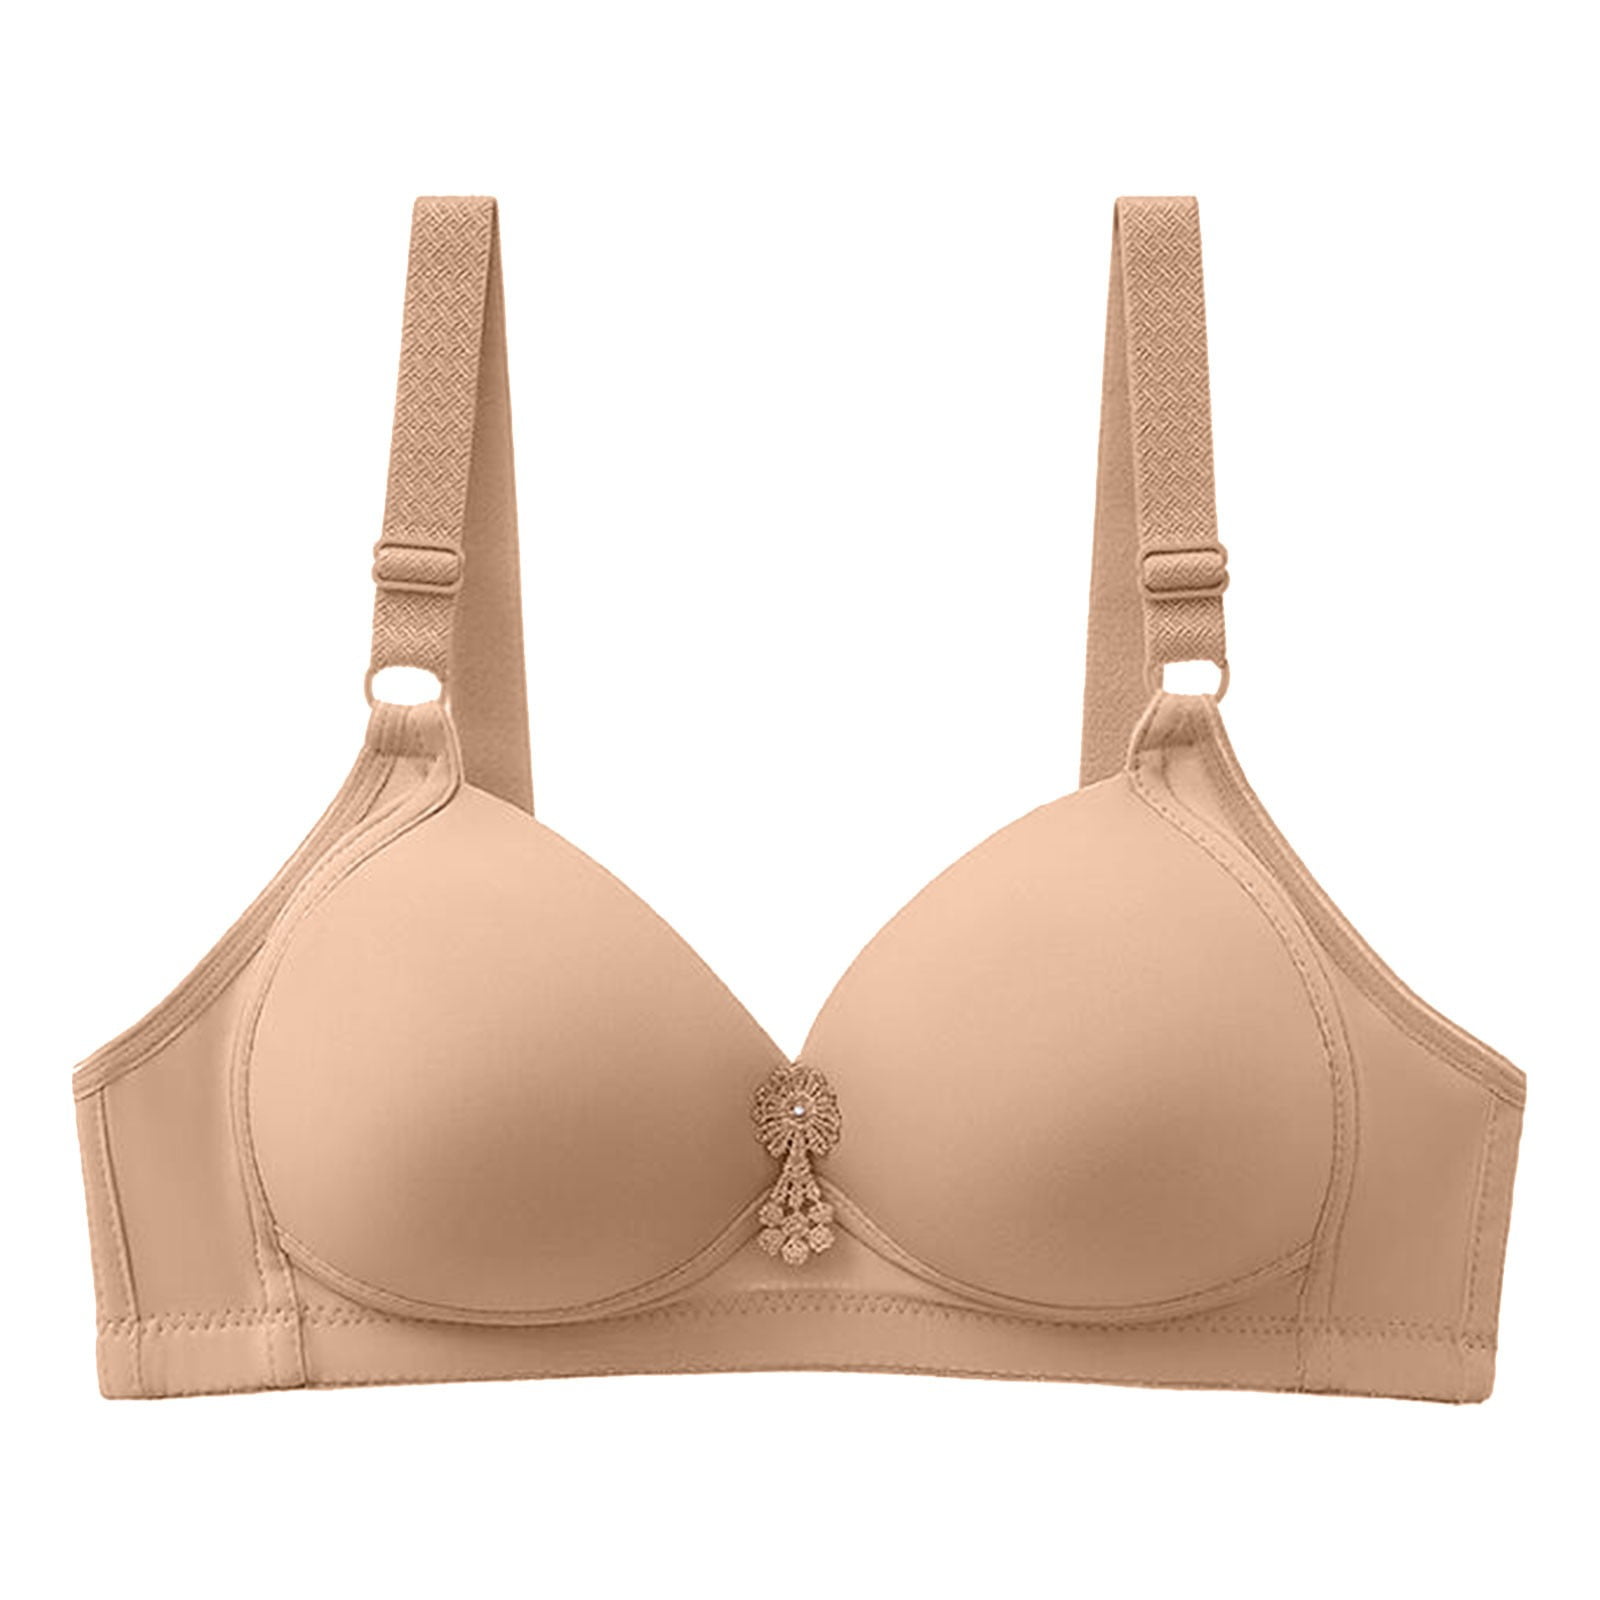 Edvintorg Push Up Bras For Women Clearance Thin Steel Ringless